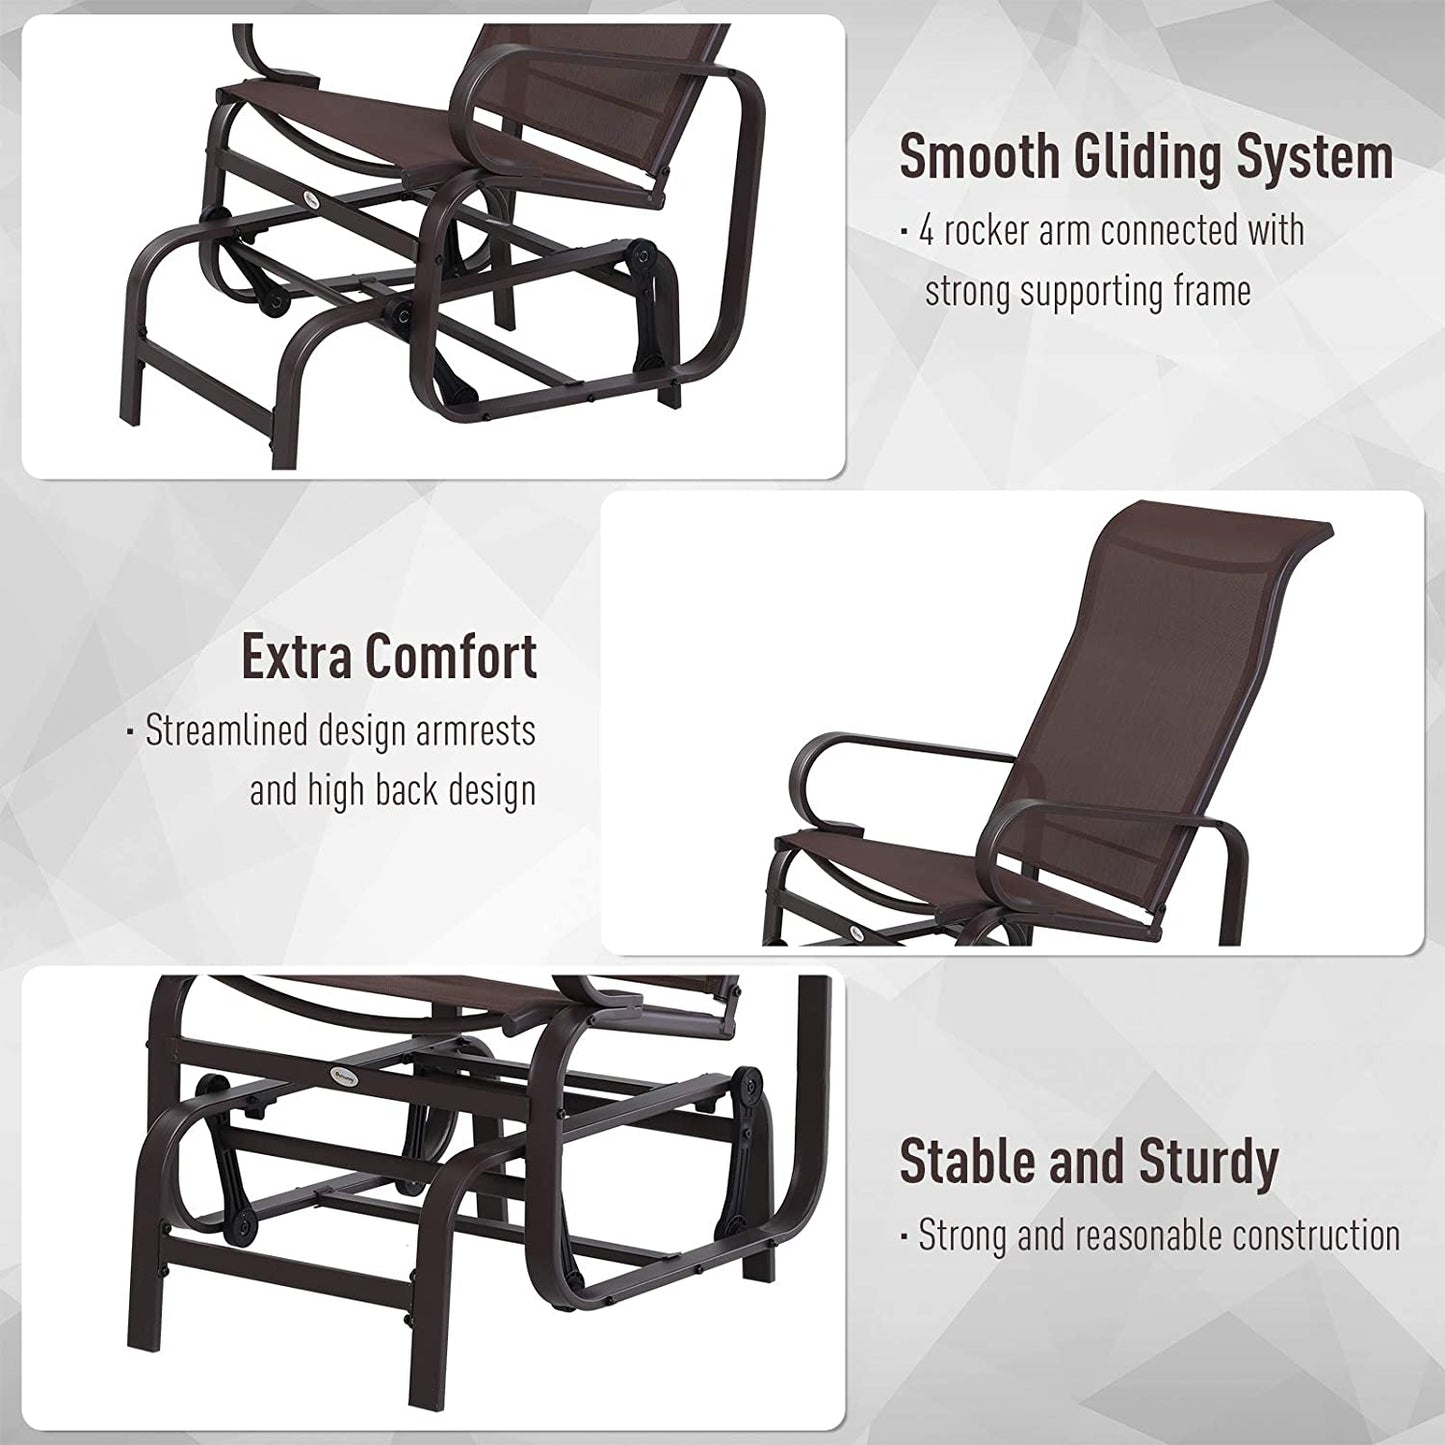 Outsunny Outdoor Gliding Rocking Chair w/ Steel Frame for Patio, Garden